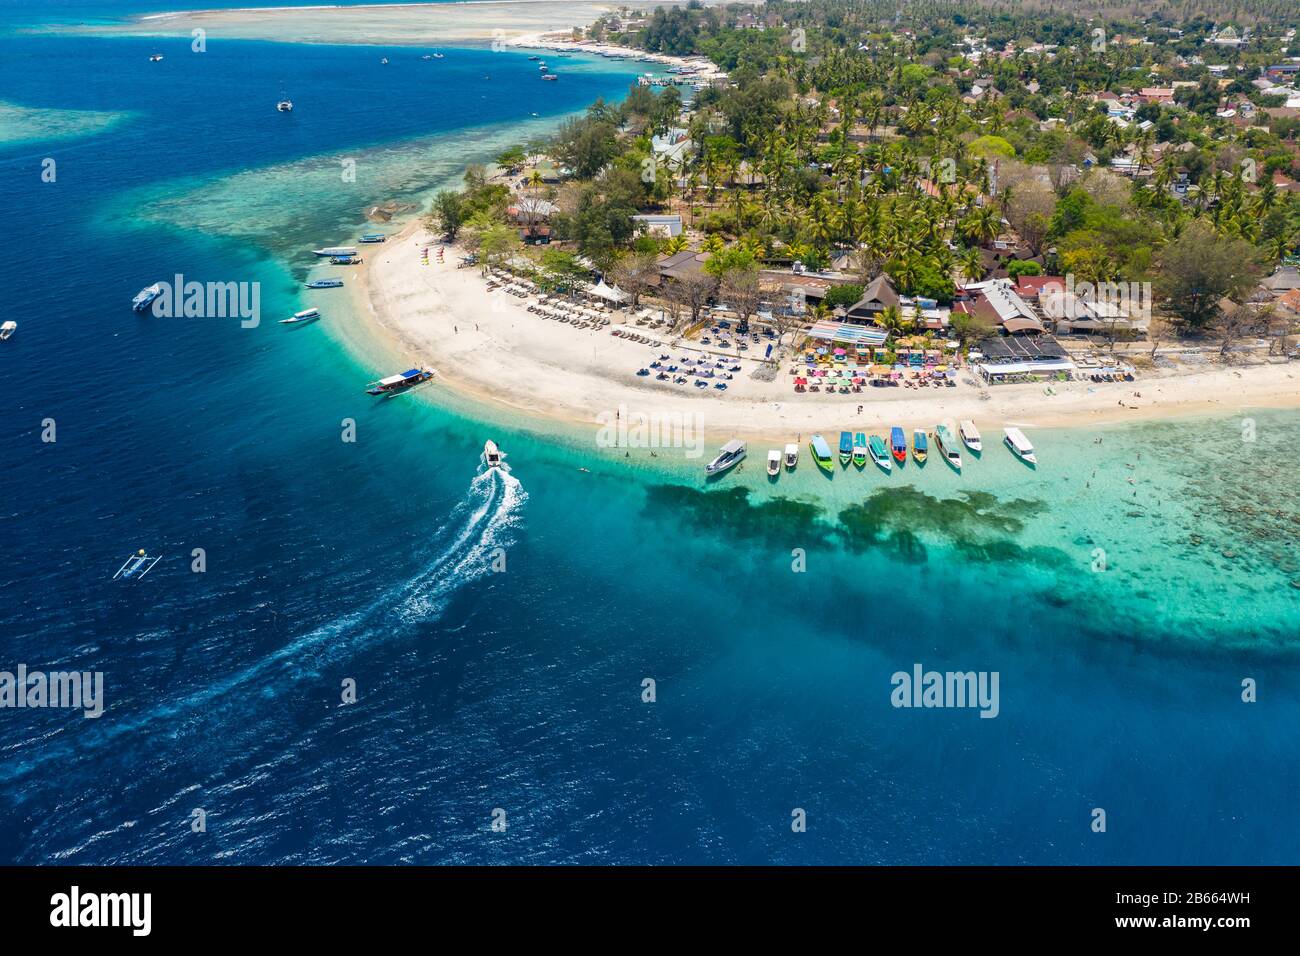 Aerial view of boats moored off a beautiful tropical coral reef and beach on a small island (Gili Air, Indonesia) Stock Photo